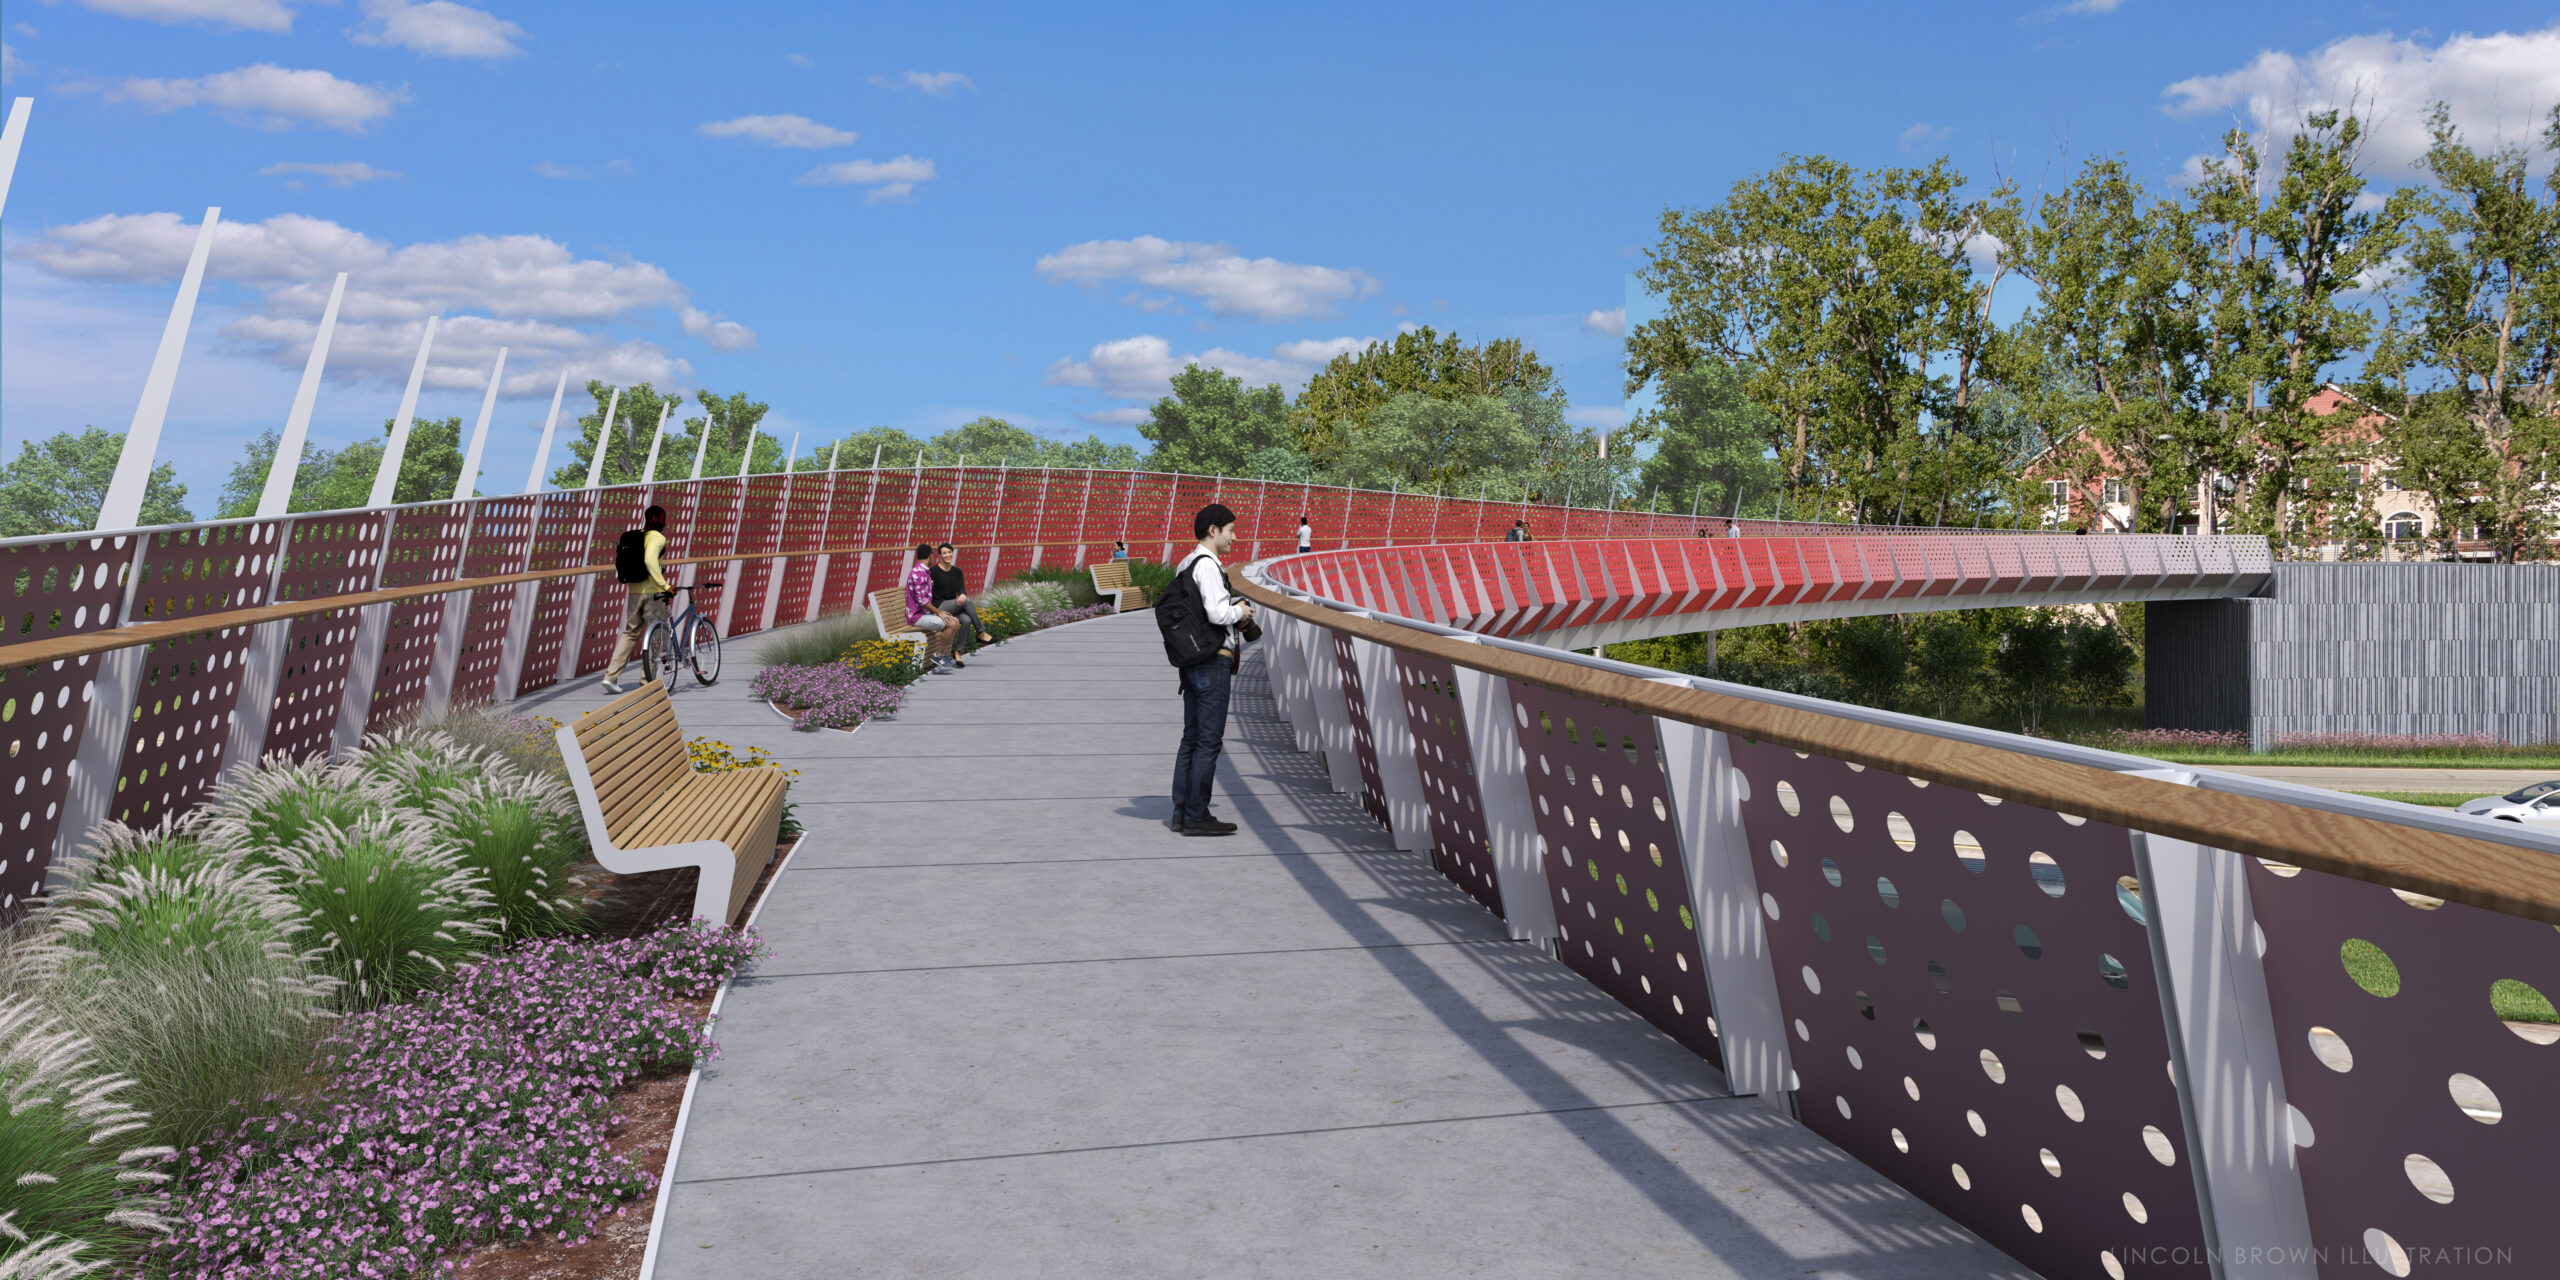 a rendering of a park with benches and a walkway